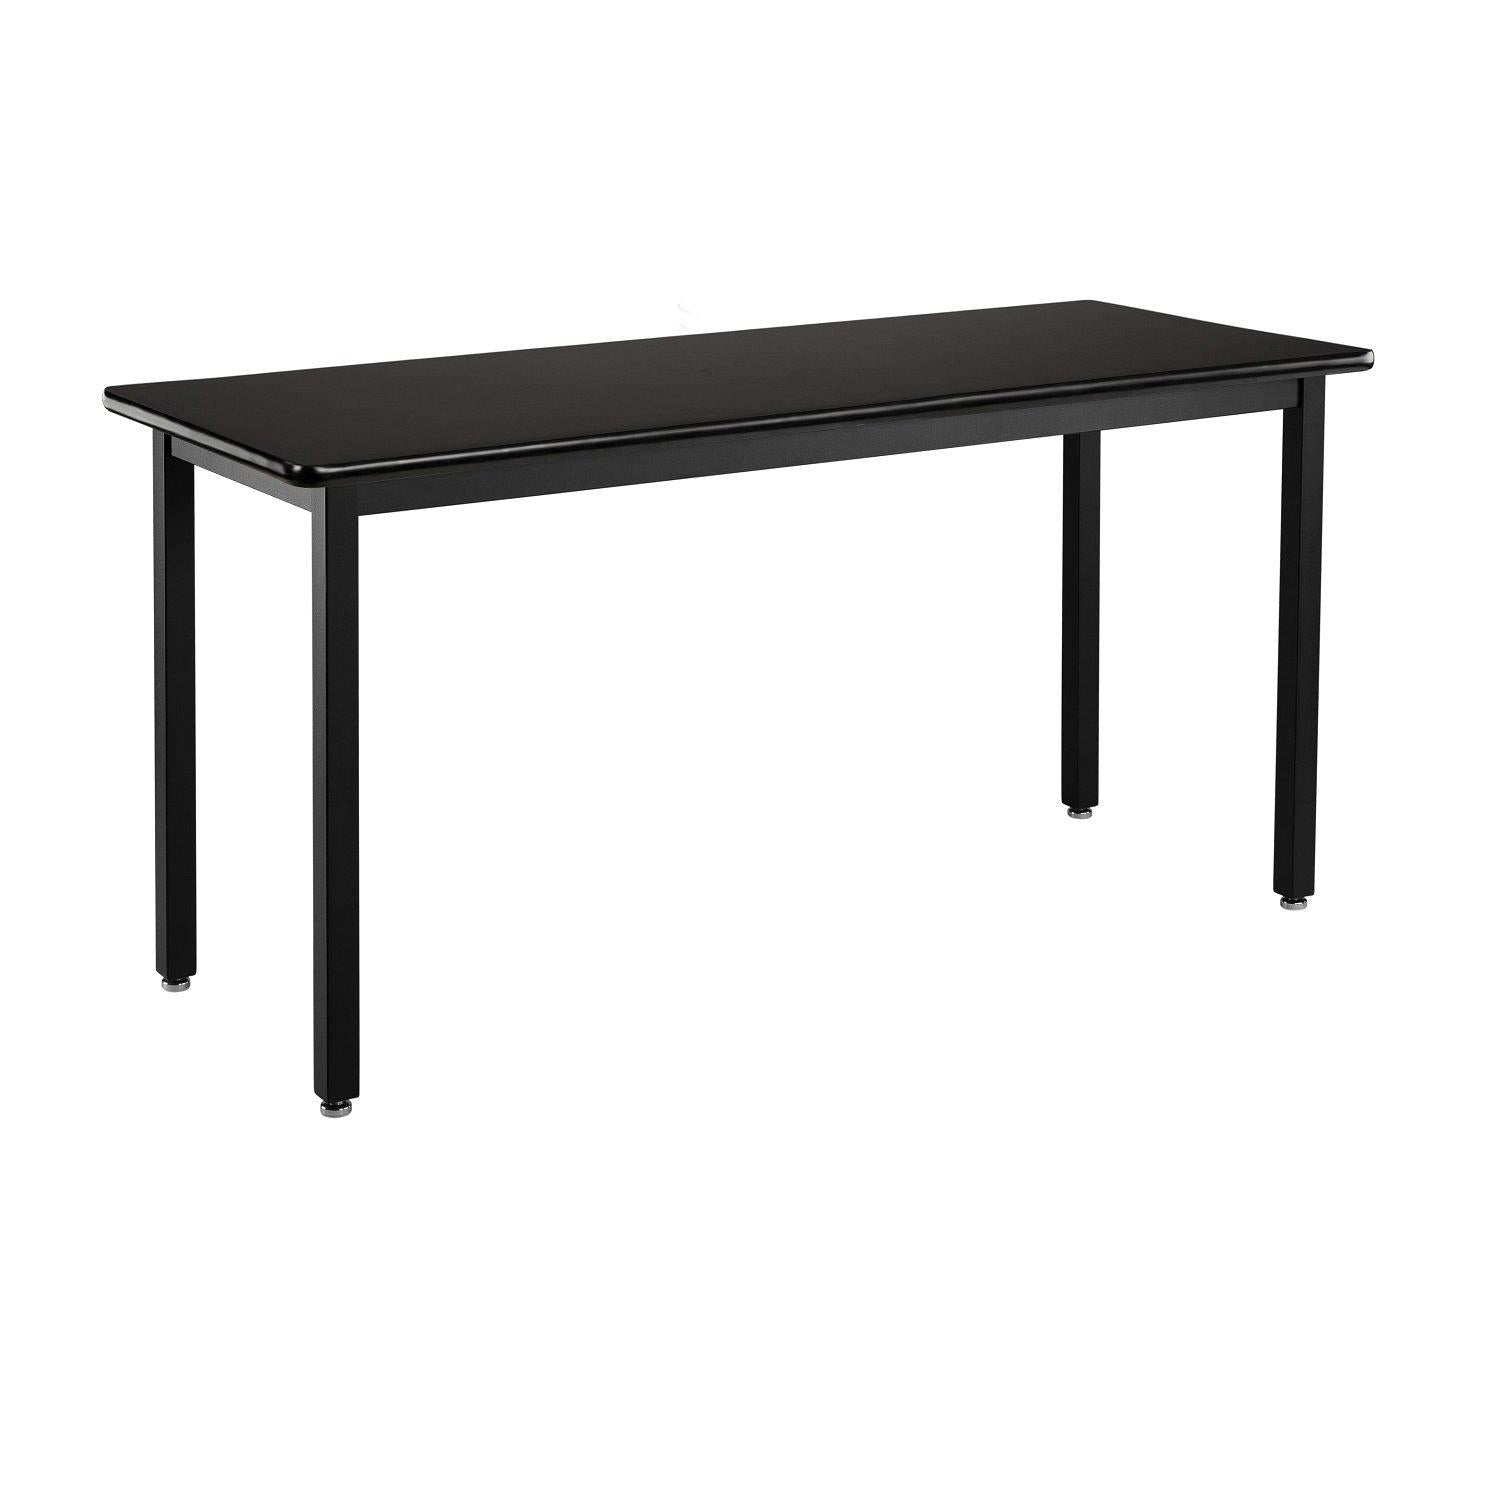 Heavy-Duty Fixed Height Utility Table, Black Frame, 24" x 60", High-Pressure Laminate Top with T-Mold Edge